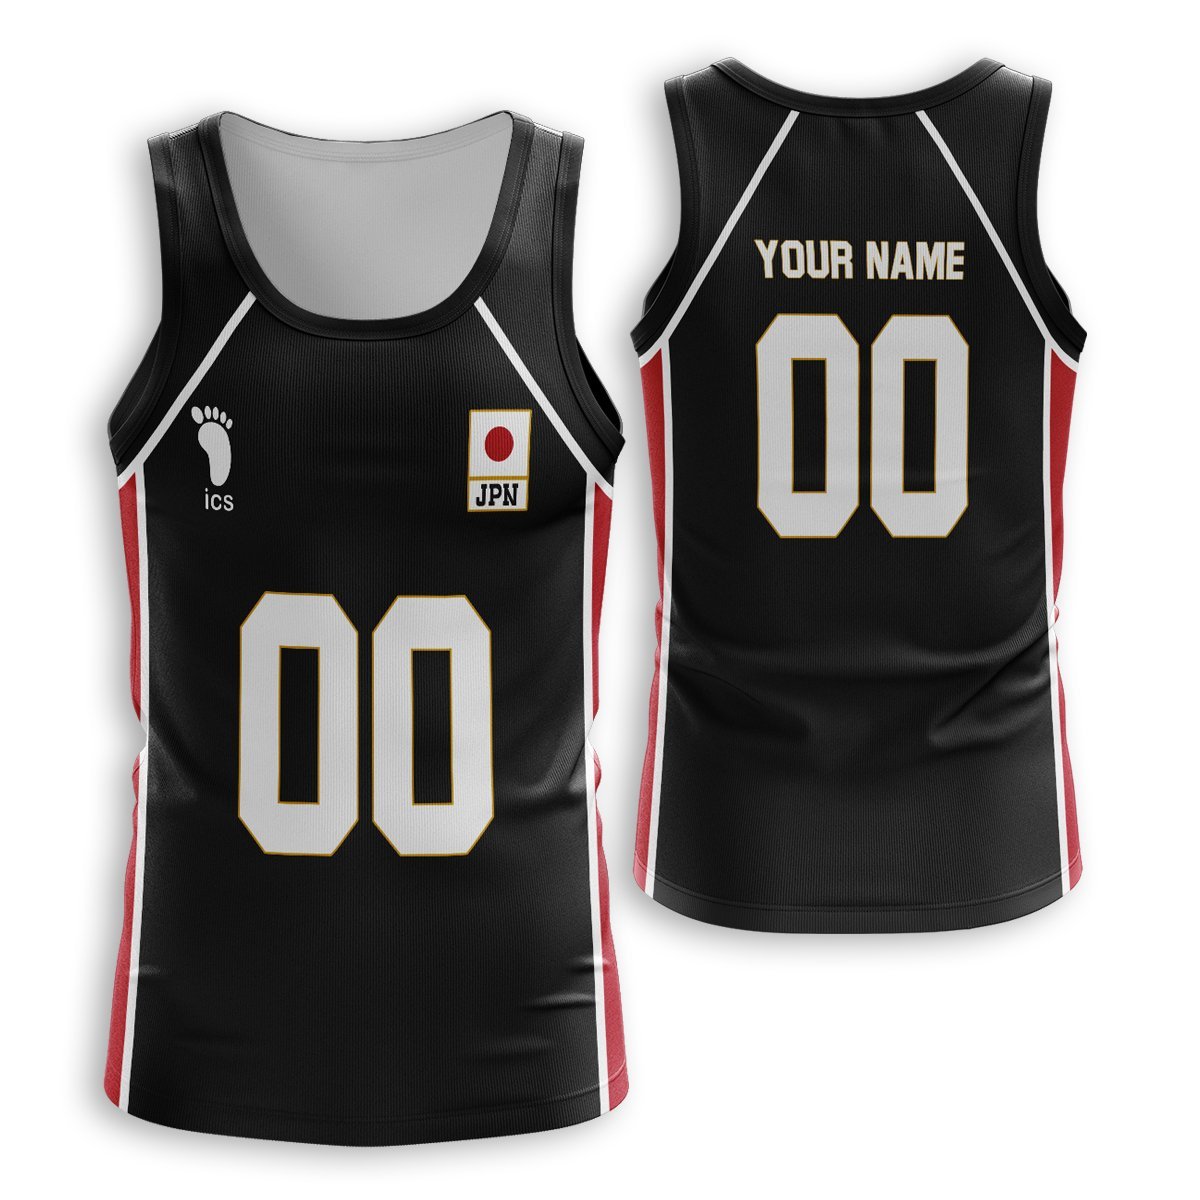 Personalized Haikyuu National Team Libero Unisex Tank Tops FDM3107 S Official Anime Swimsuit Merch